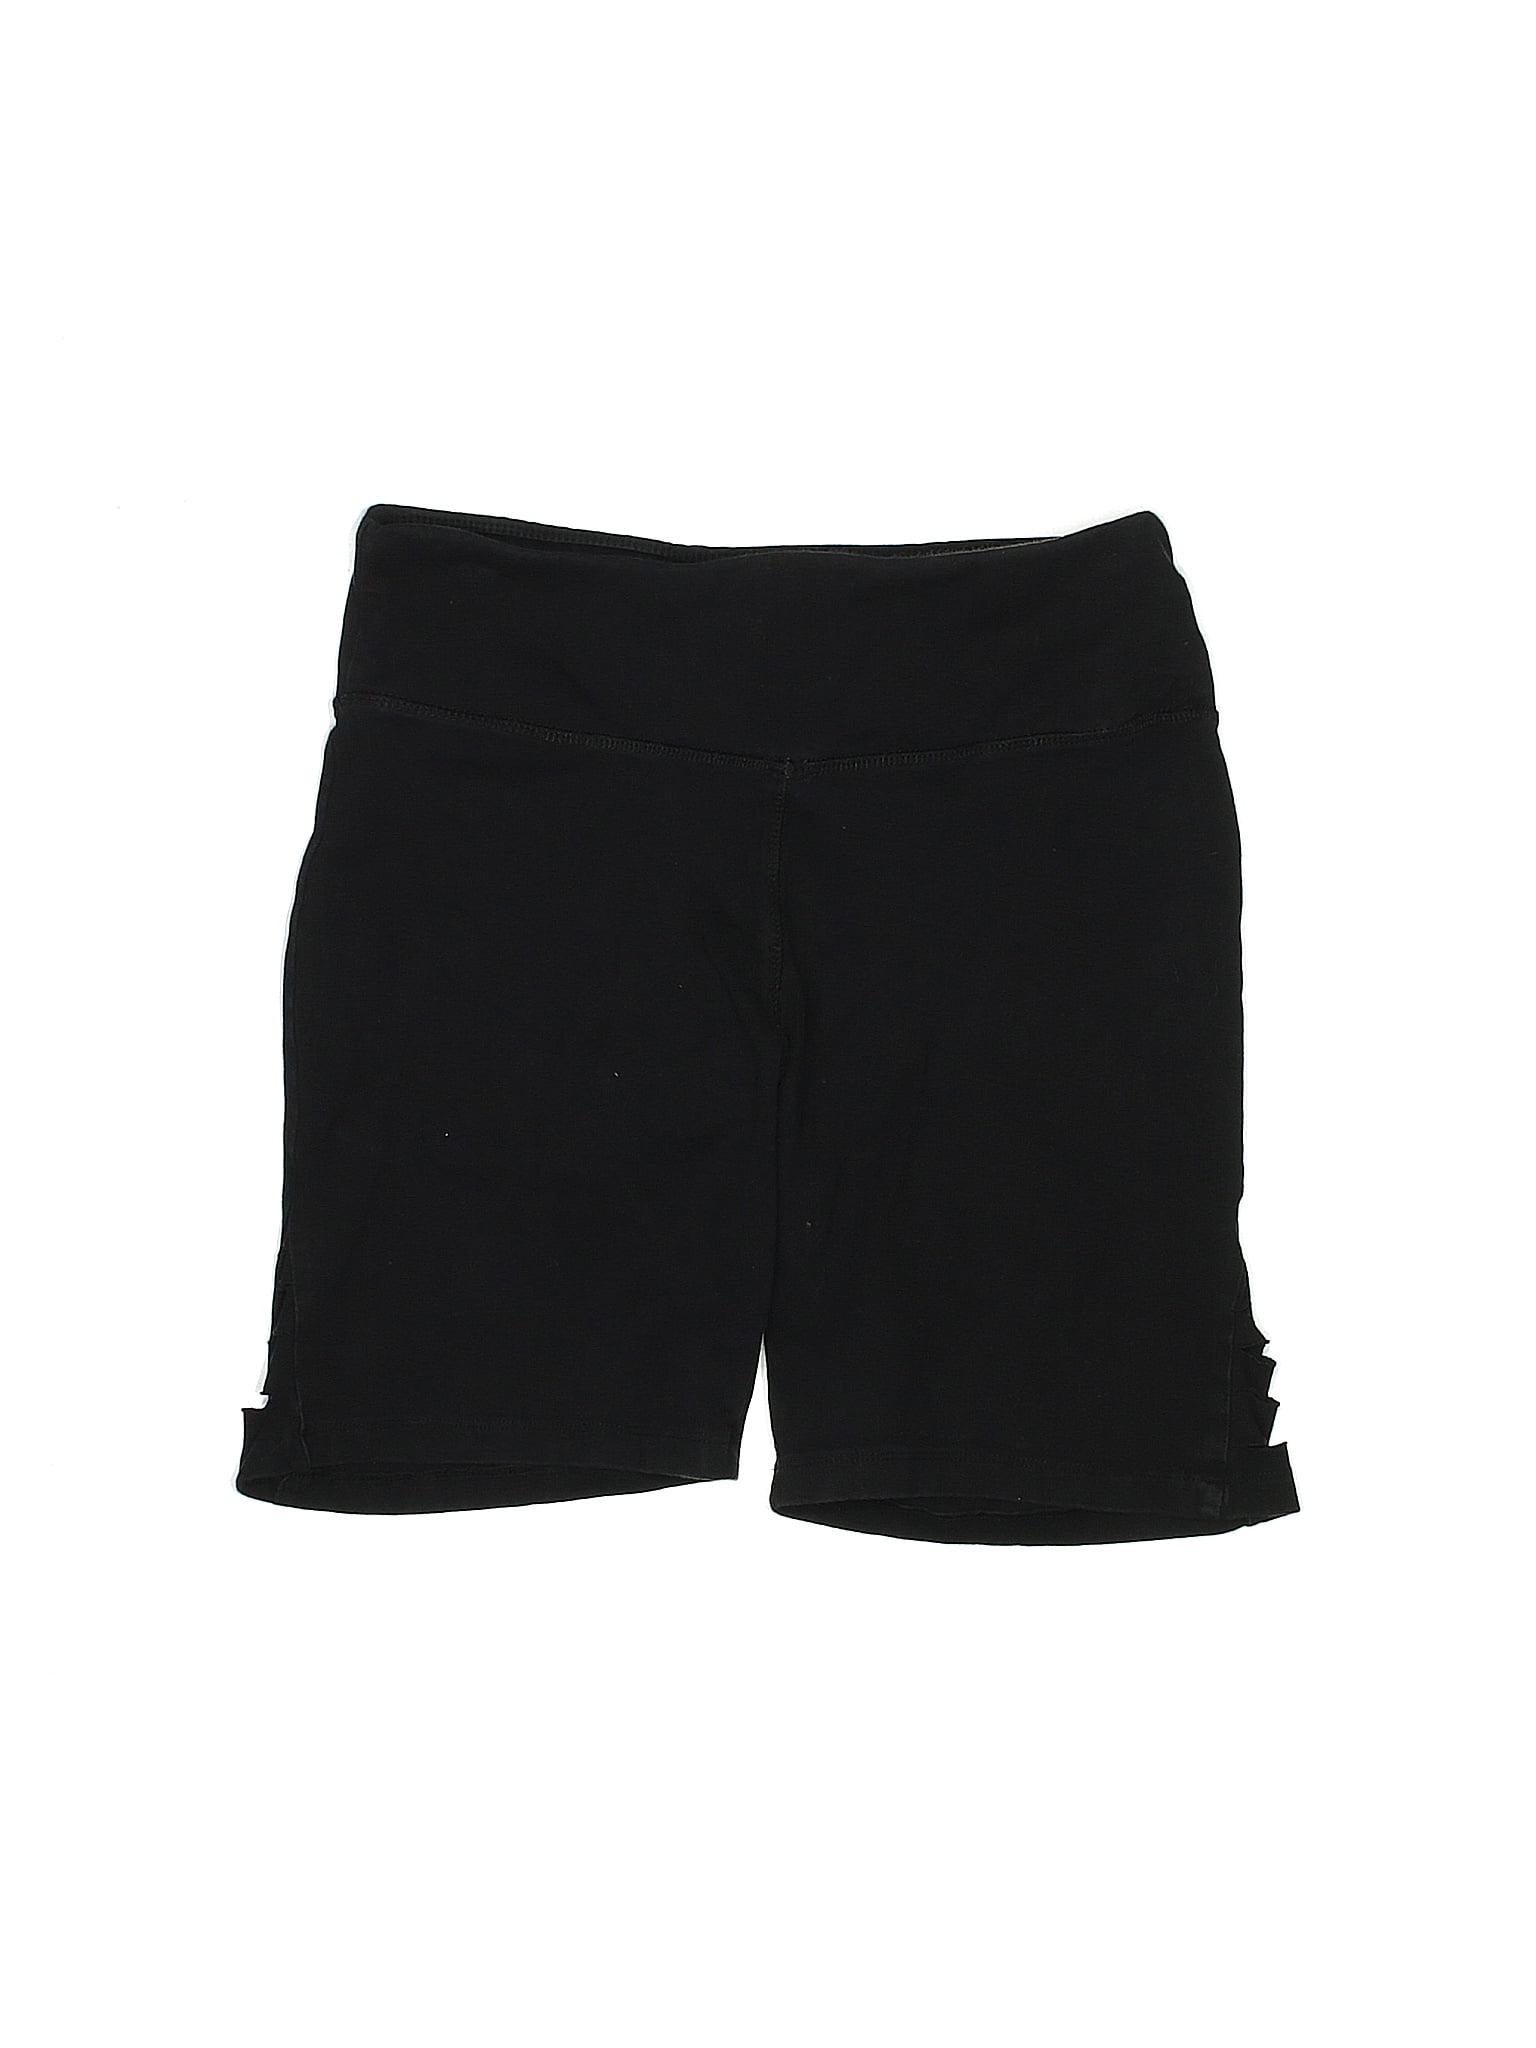 French Laundry Solid Black Shorts Size M - 25% off